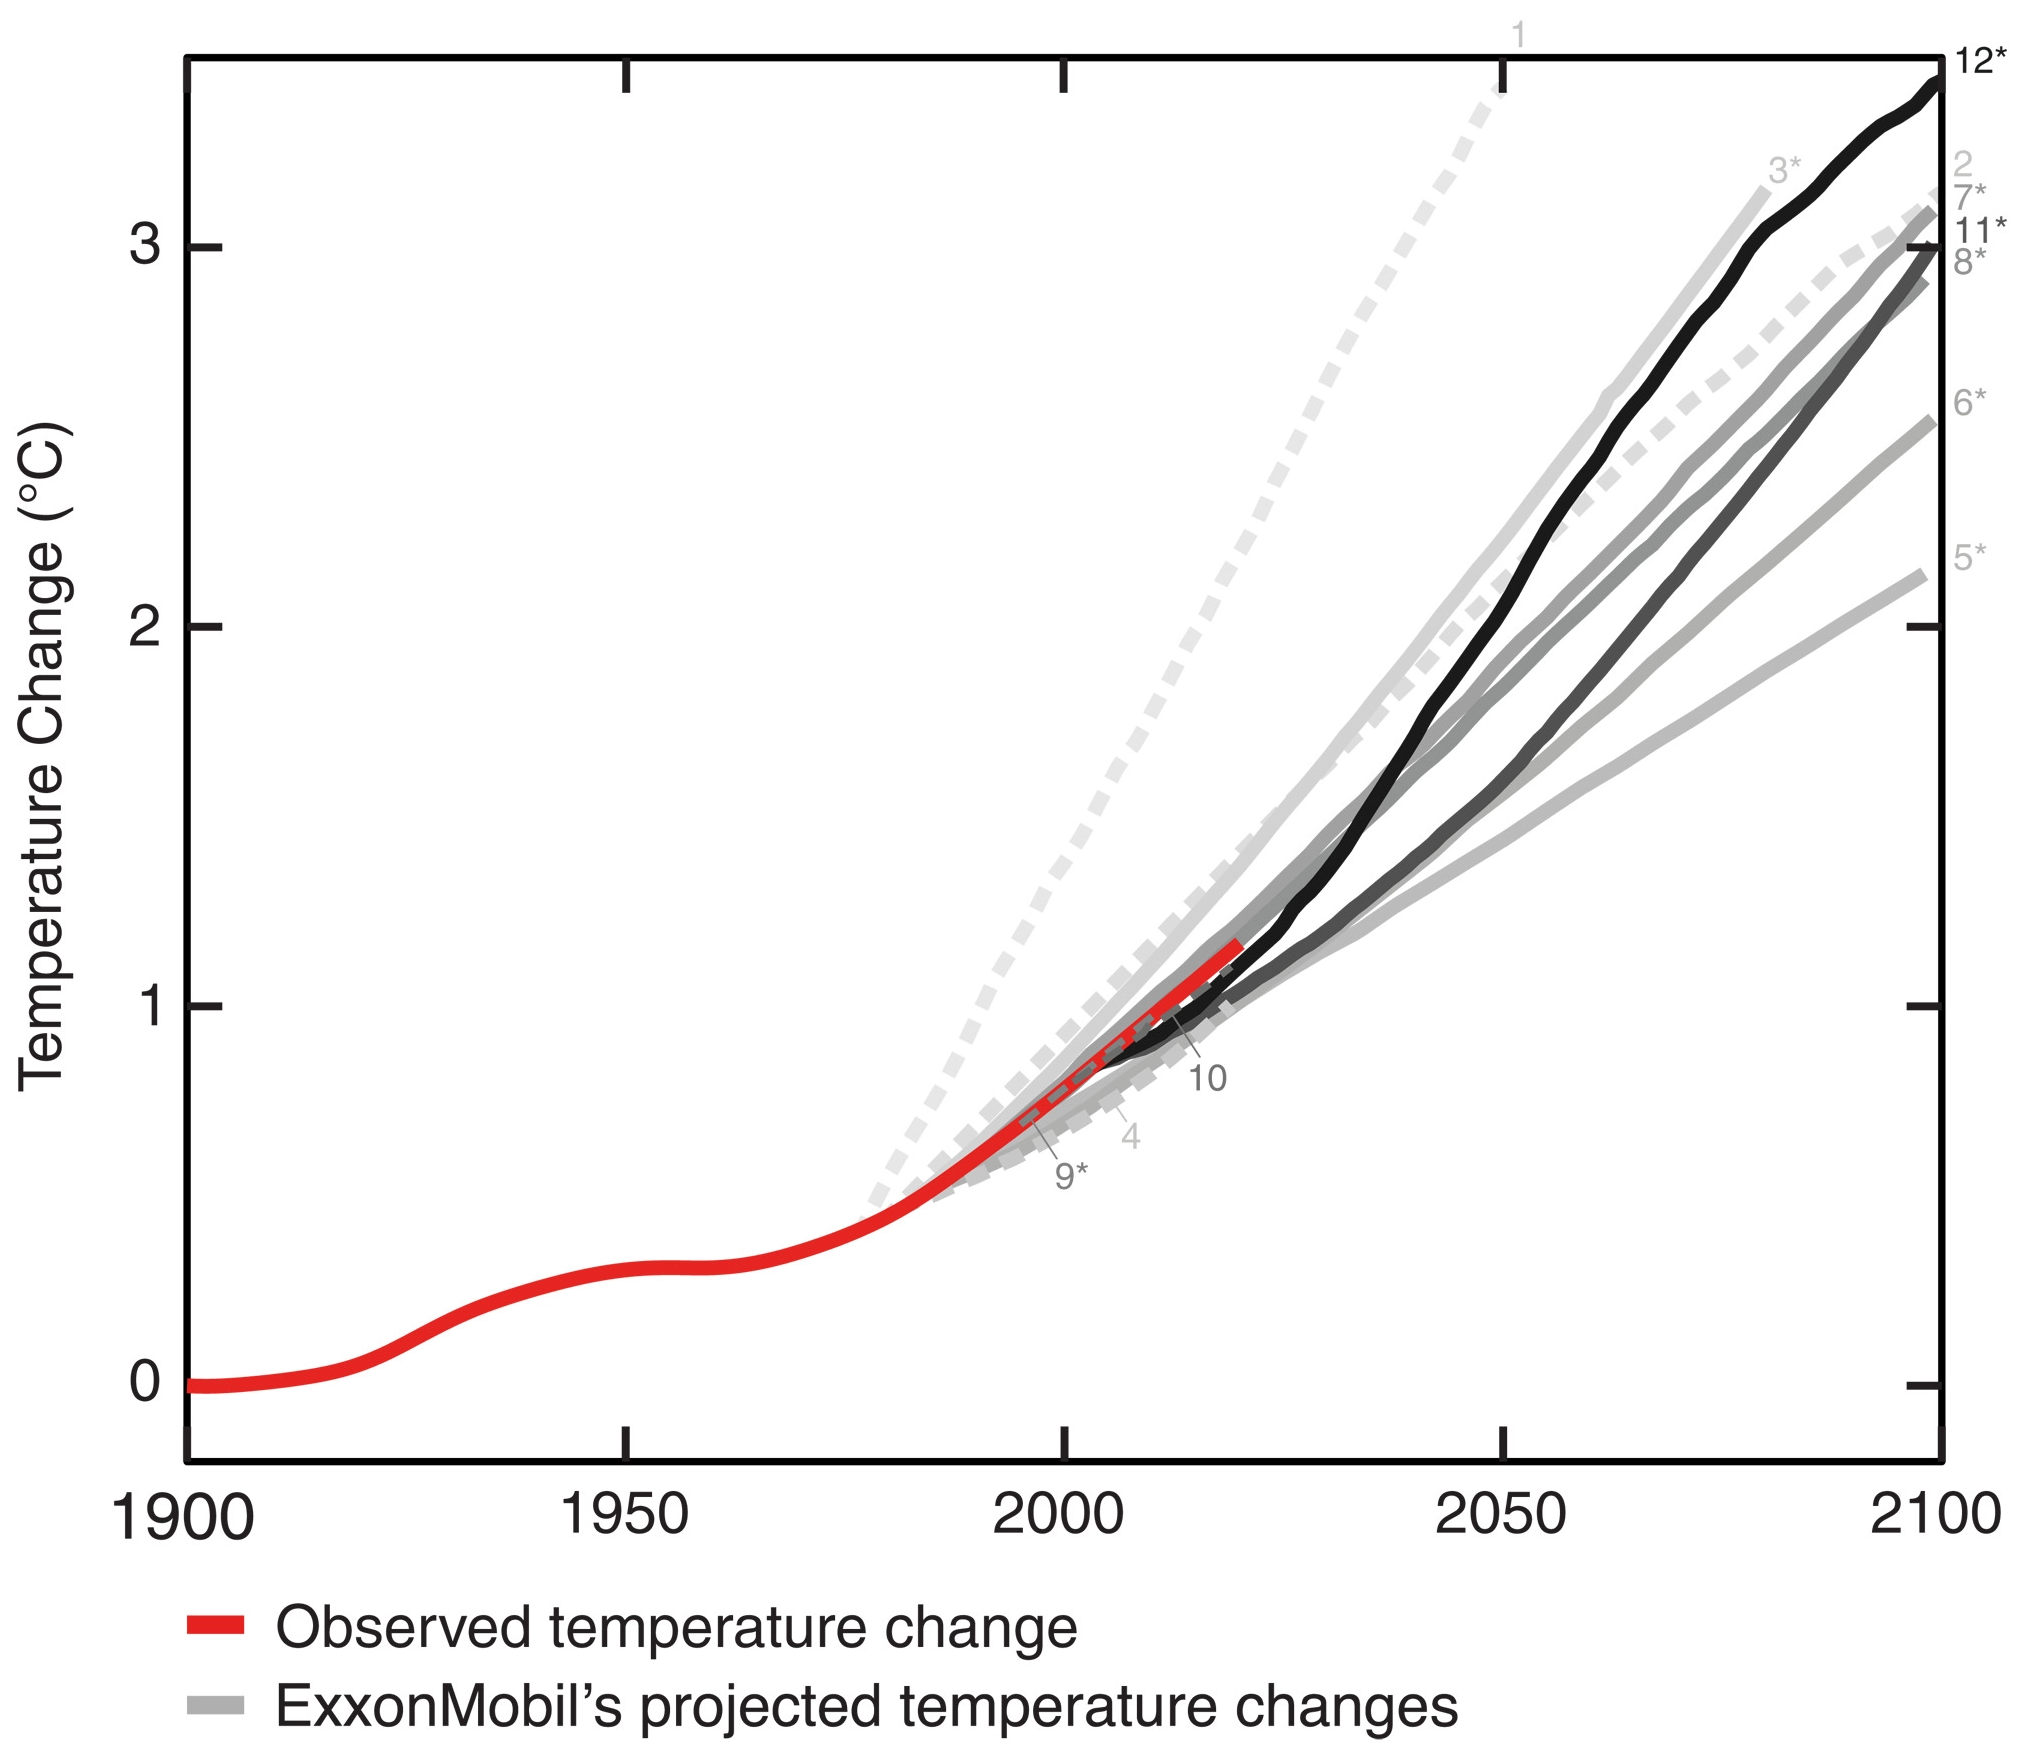 Summary of all global warming projections (nominal scenarios) reported by ExxonMobil scientists in internal documents and peer-reviewed publications (gray lines), superimposed on historically observed temperature change (red). Solid gray lines (and asterisked numerical labels) indicate global warming projections modeled by ExxonMobil scientists themselves; dashed gray lines indicate projections internally reproduced by ExxonMobil scientists from third-party sources. Shades of gray and numerical labels scale with model start dates, from earliest (1977: lightest, “1”) to latest (2003: darkest, “12”). Numerical labels correspond to panels in Fig. 1, which displays all original graphical projections reported by ExxonMobil scientists. Observations reflect the smoothed annual average of five historical time series. Graphic: Supran, et al., 2023 / Science